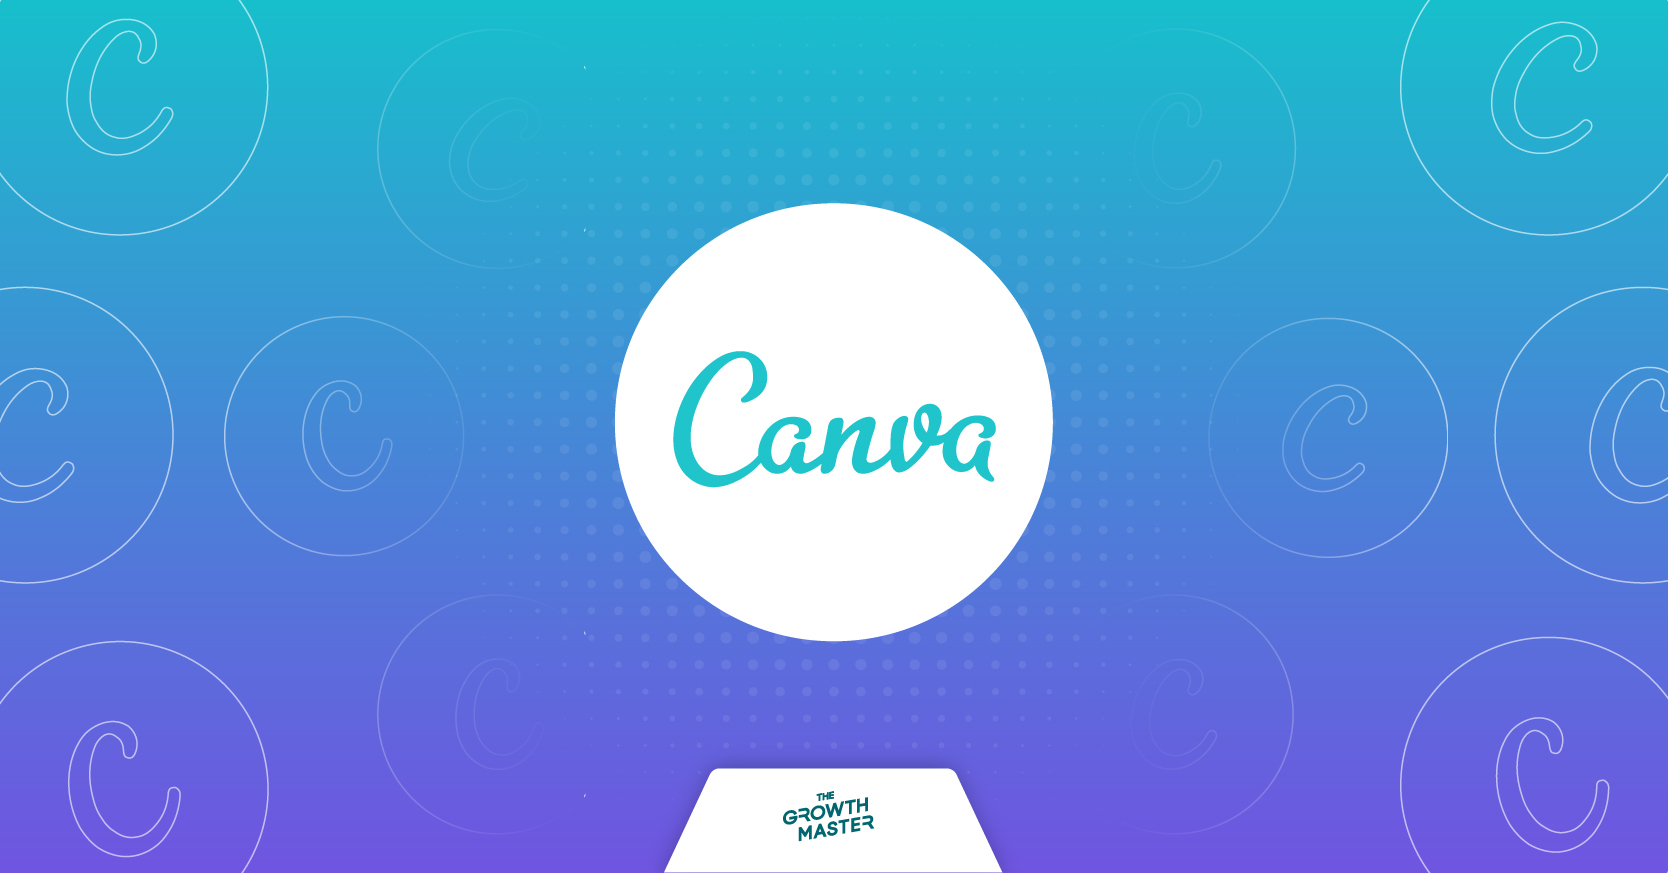 47361Canva Premium Account Available in 99 BDT ????